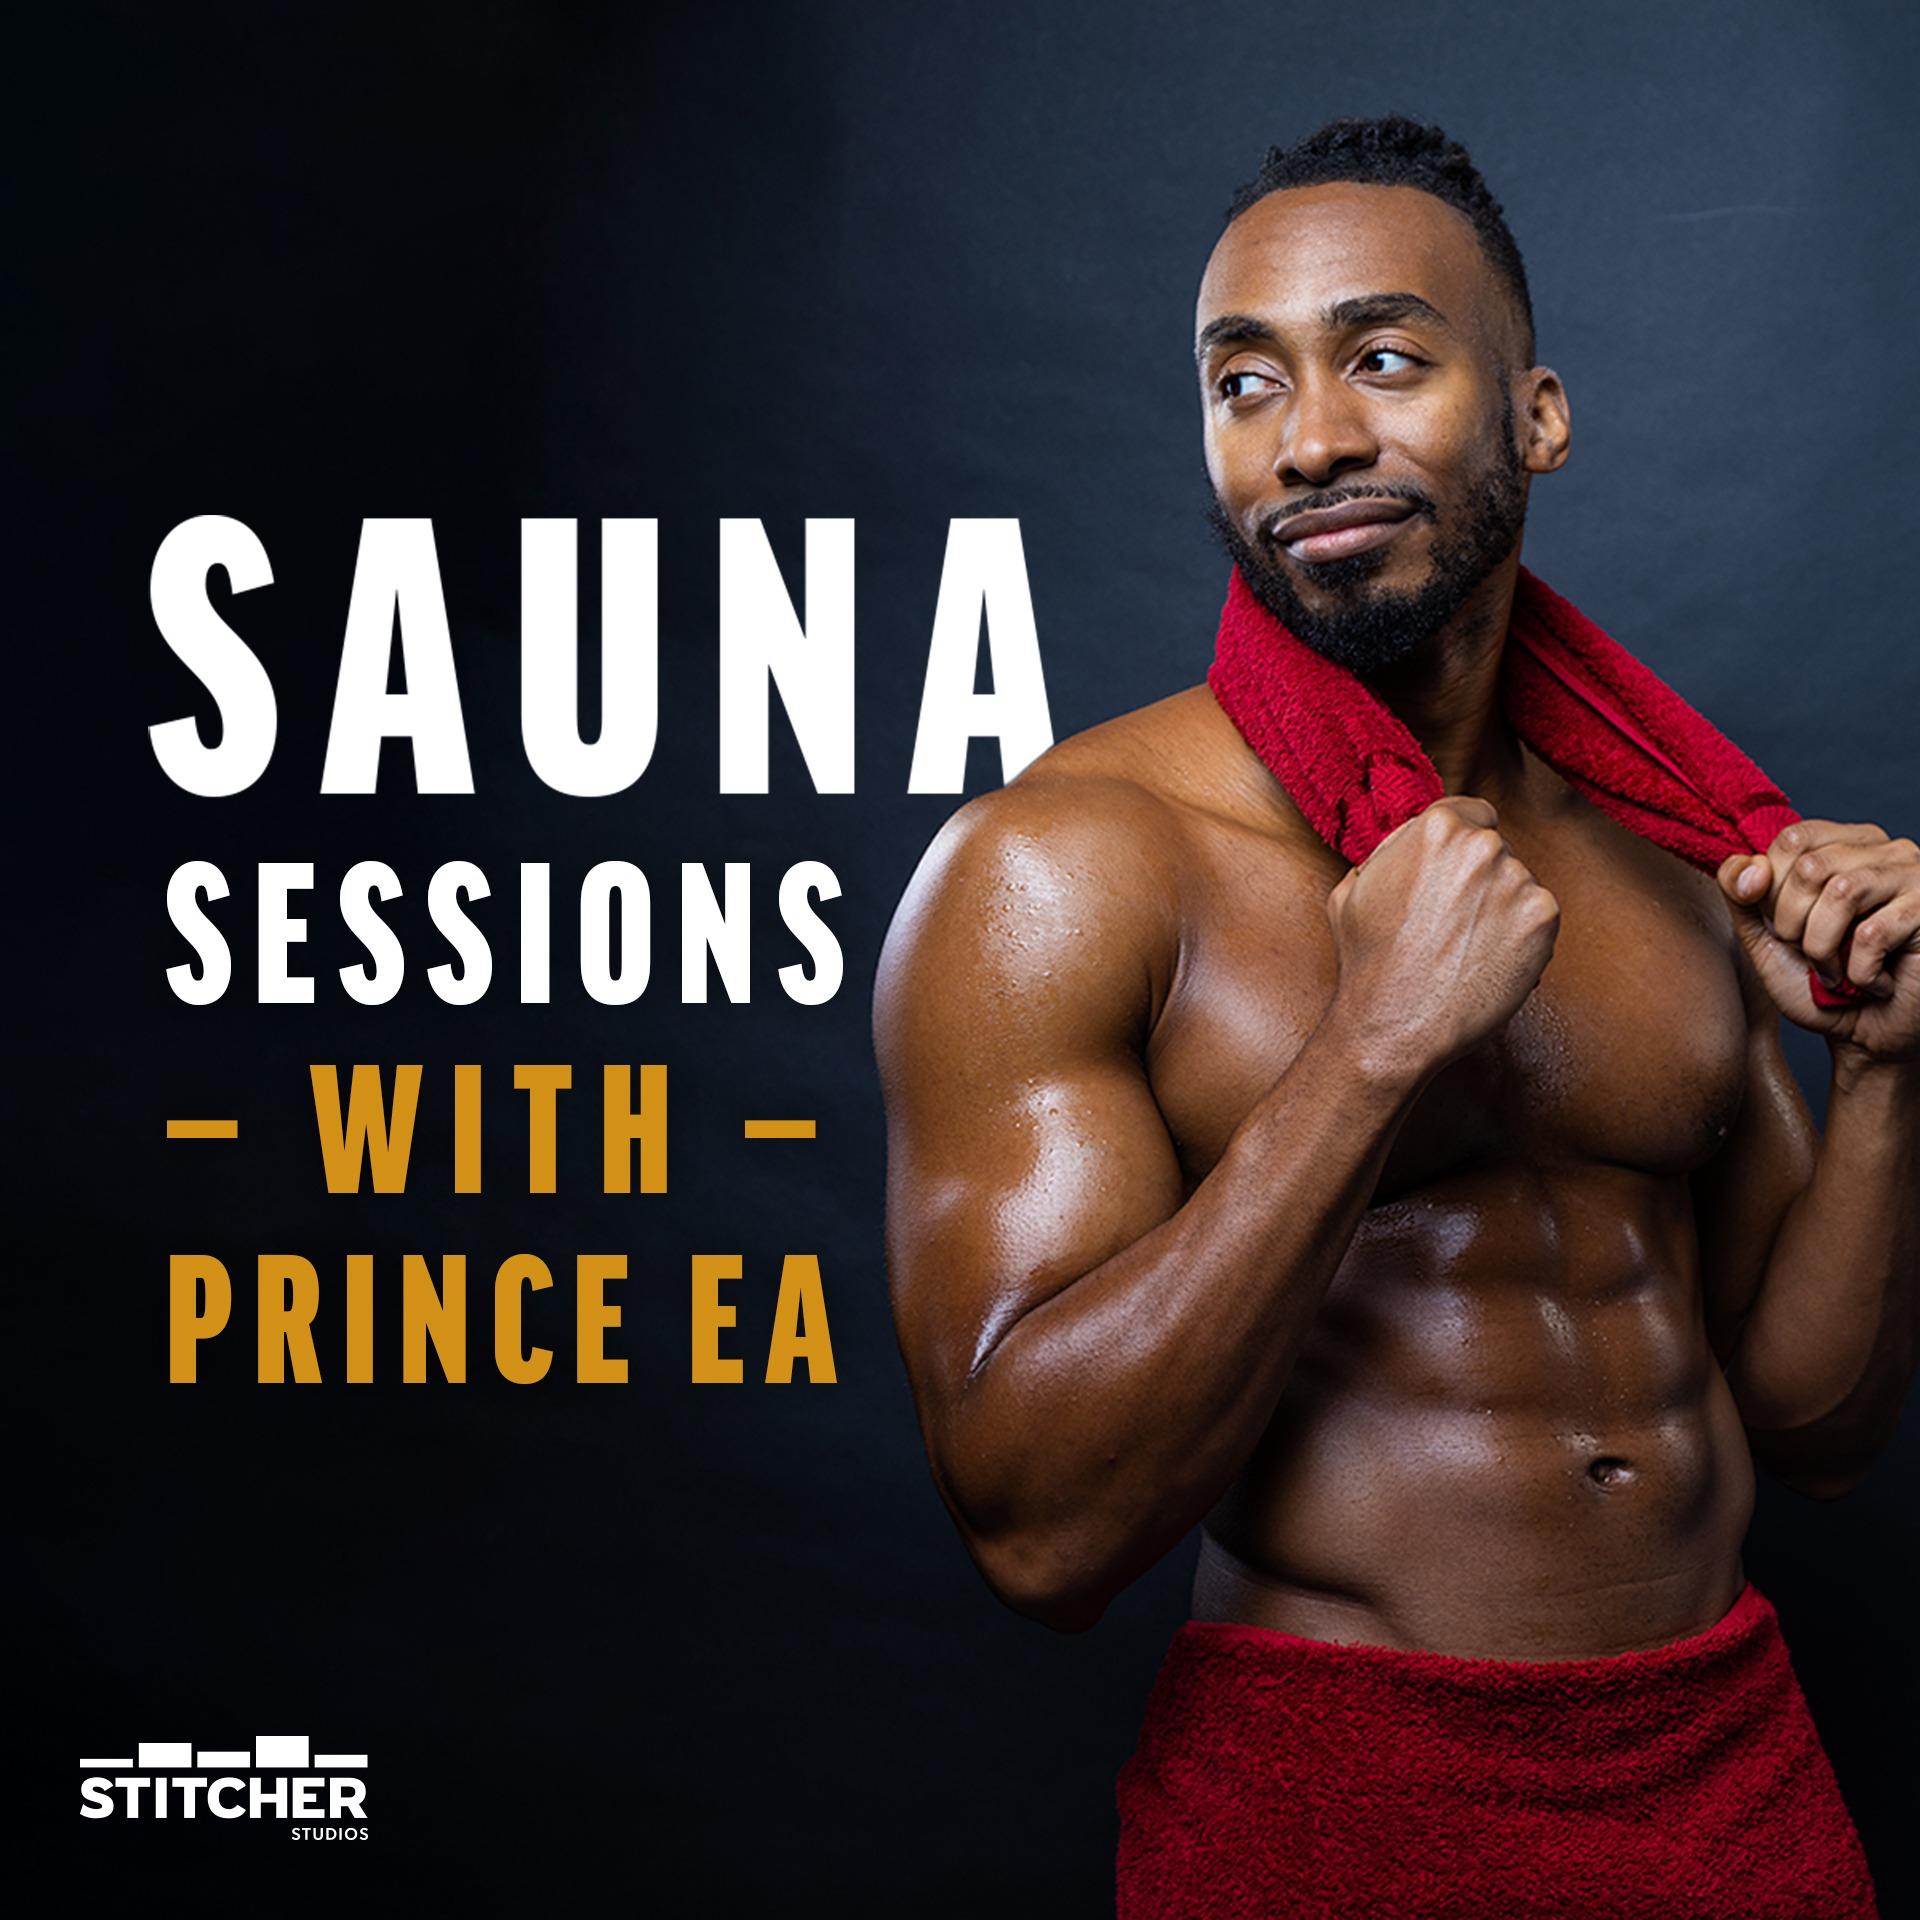 Show poster of Sauna Sessions